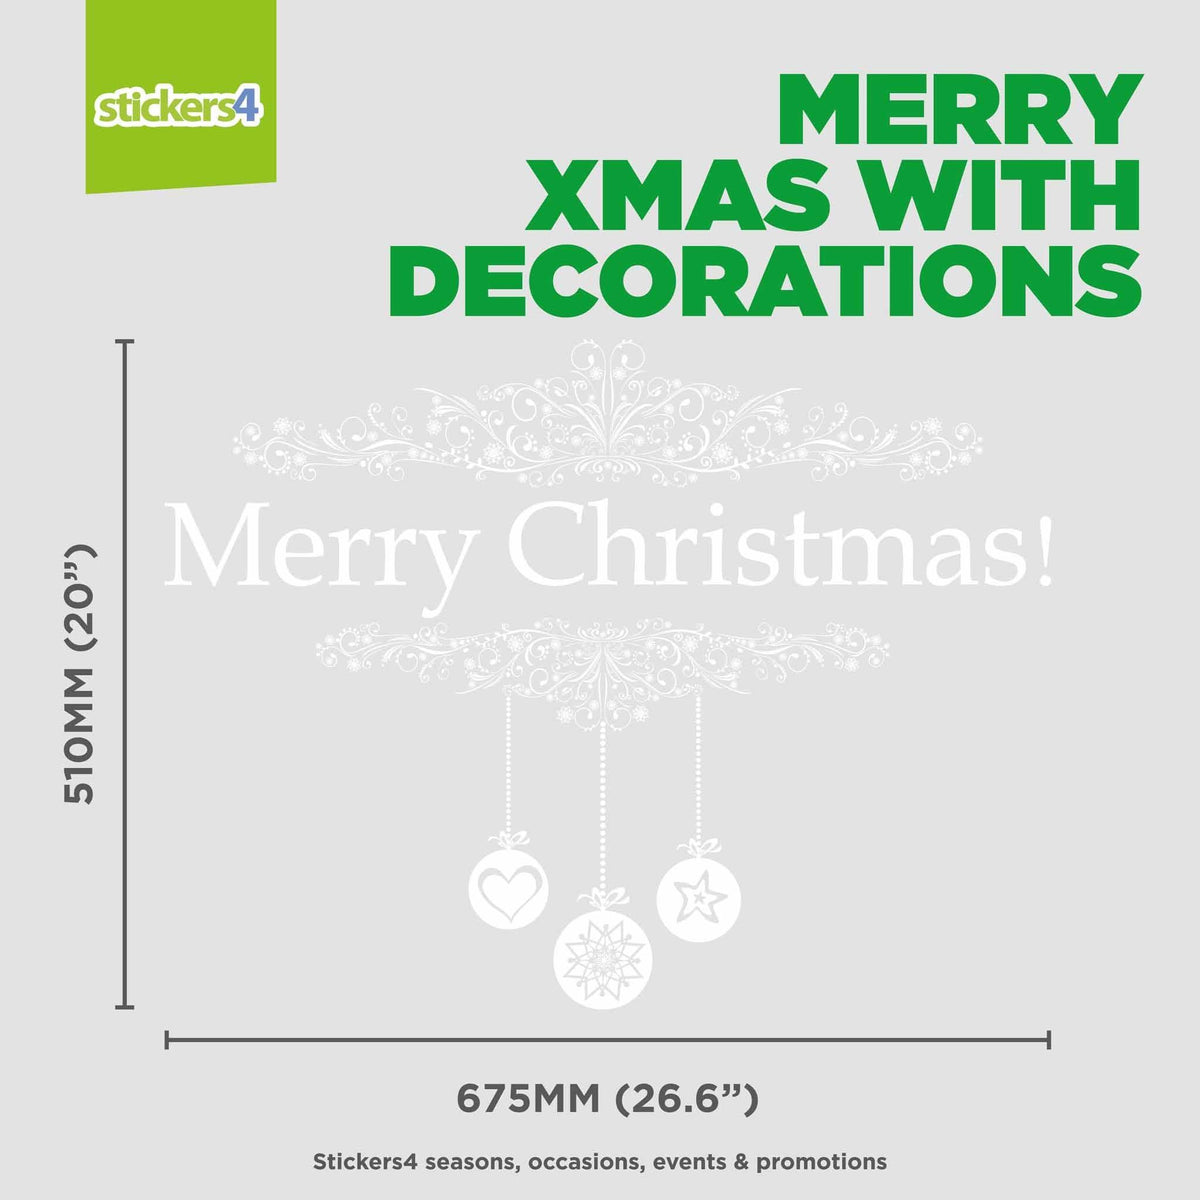 Merry Christmas with Decorations Window Cling Sticker Christmas Window Display